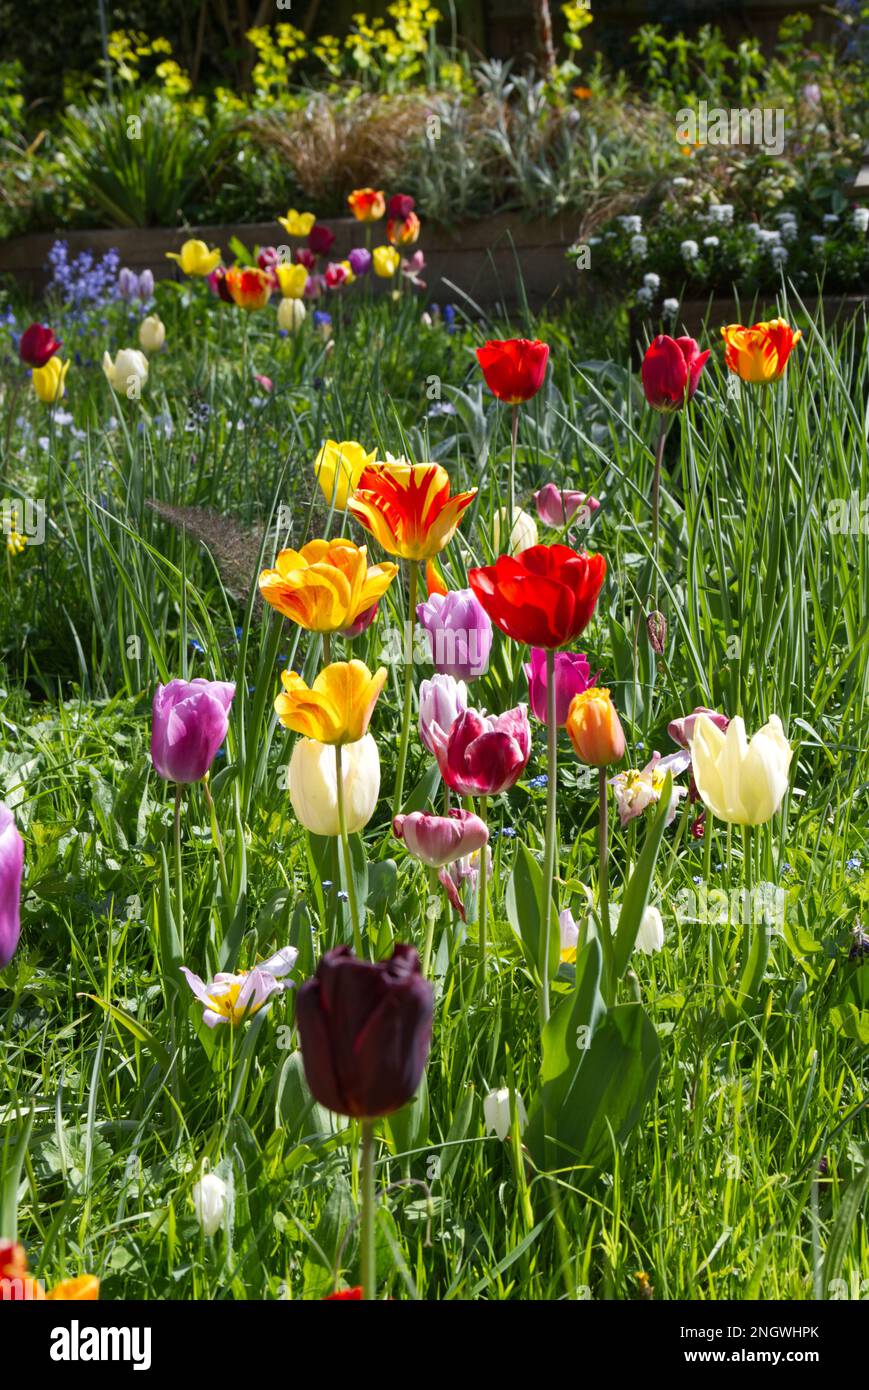 Colourful spring mix of tulips, bluebells, and white snake's head fritillary Fritillaria meleagris and grass creating a floral meadow effect UK garden Stock Photo